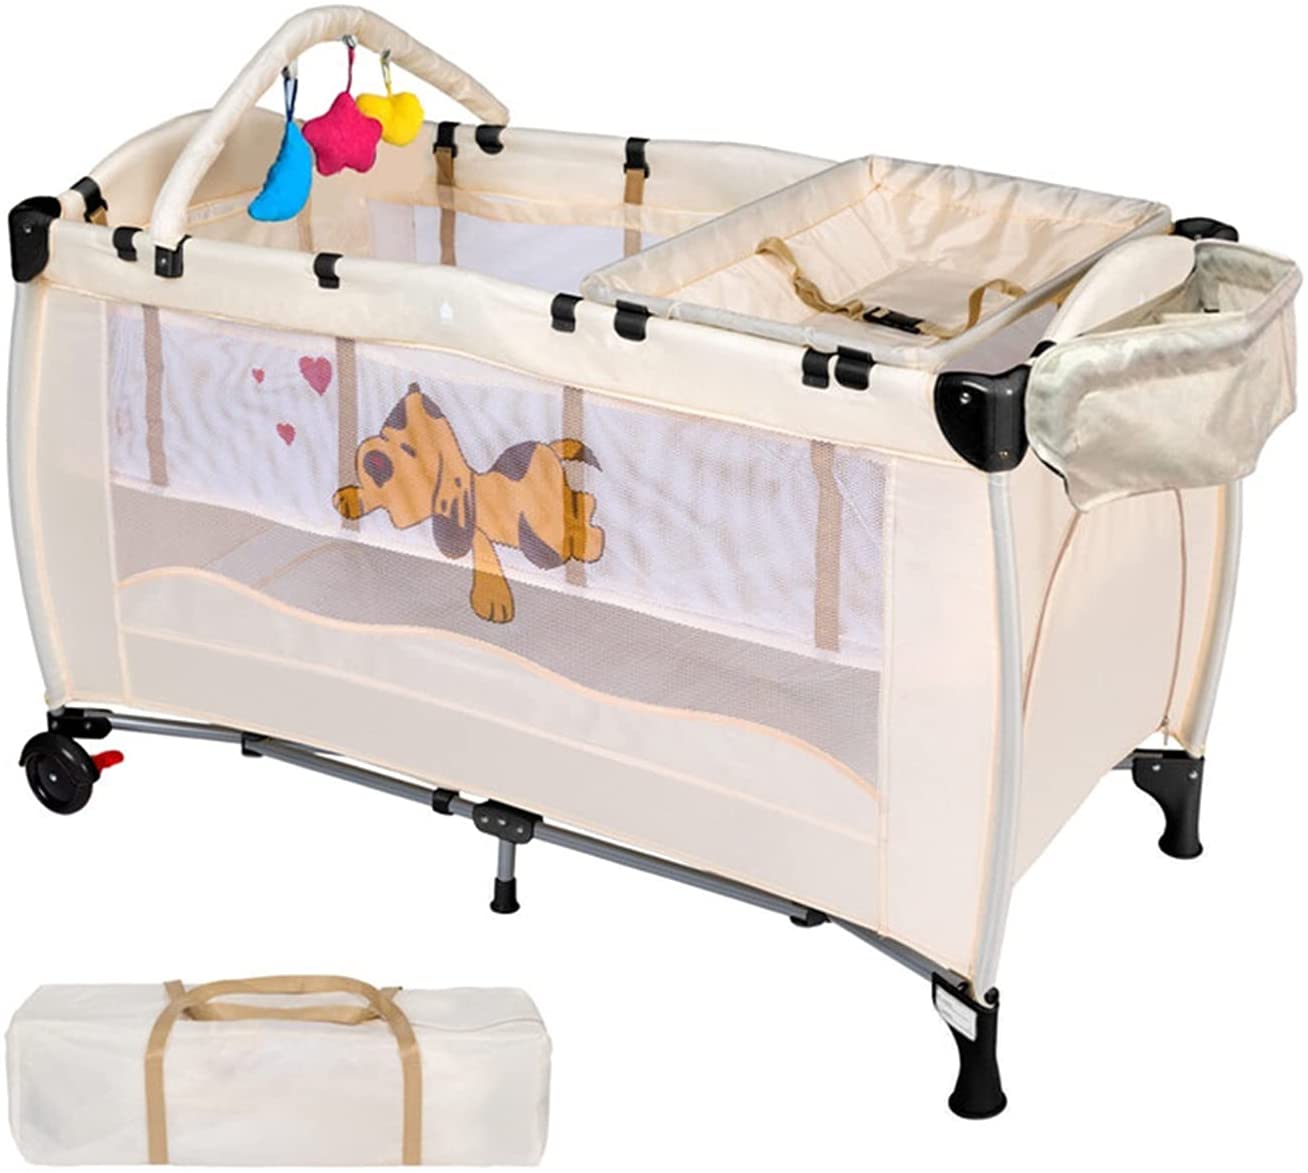 baby travel bed portable folding beigebaby play bed playard pack play play baby baby crib bassinet